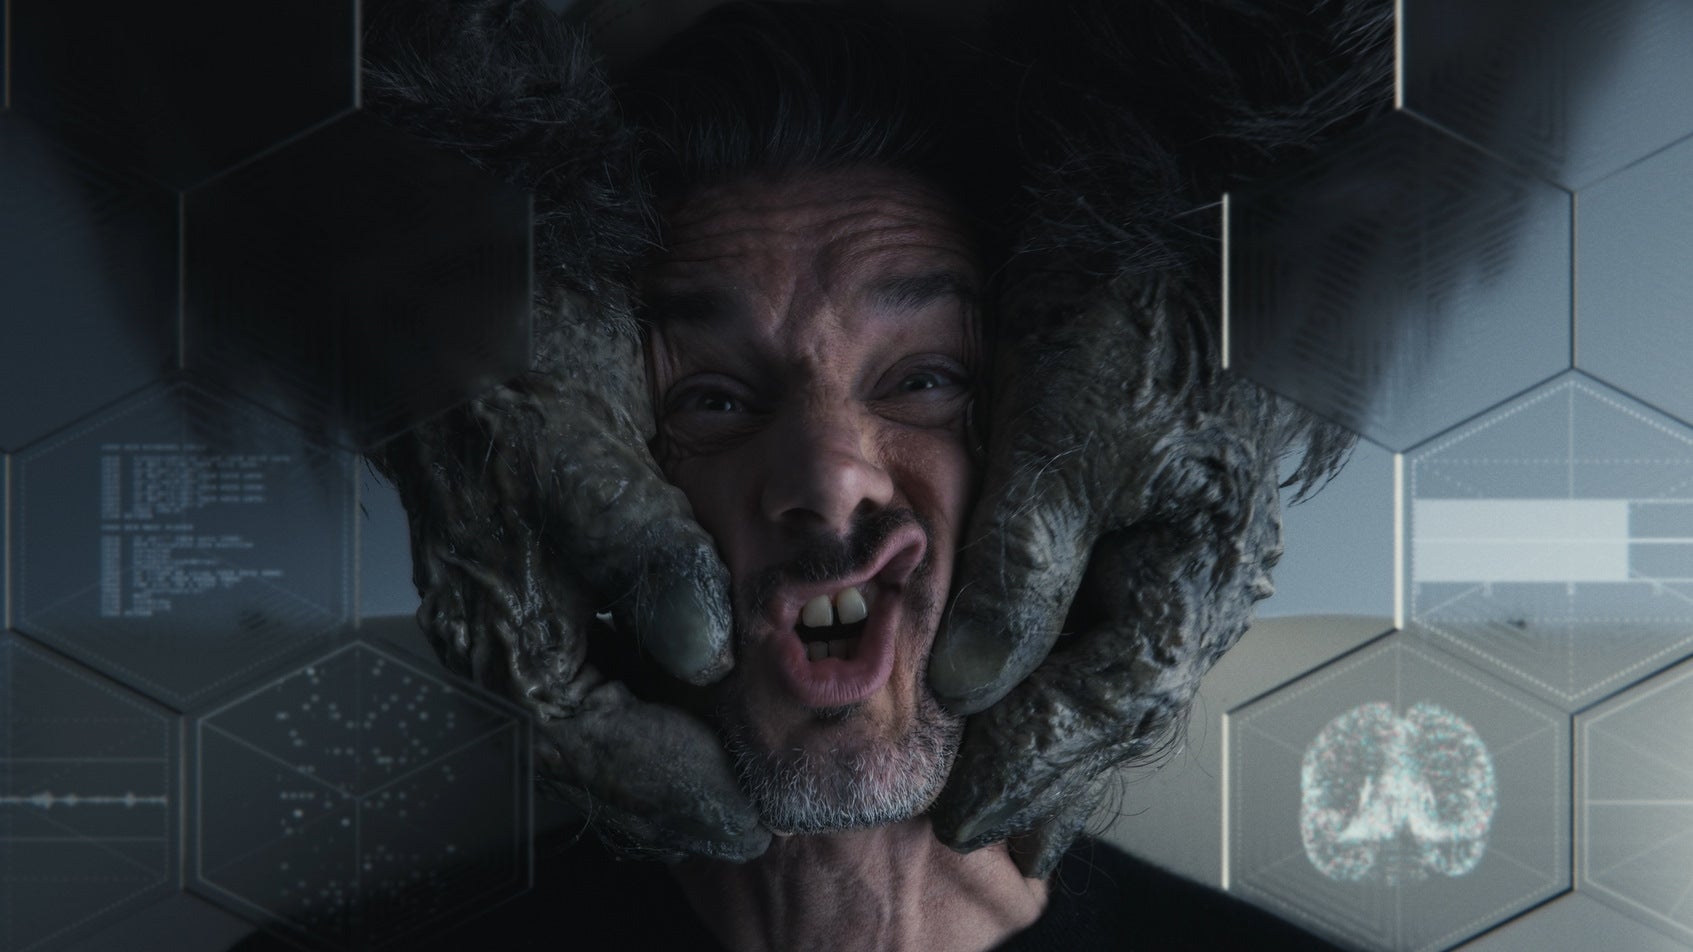 Image for Sennheiser's gaming headset biz transforms with frankly terrifying trailer